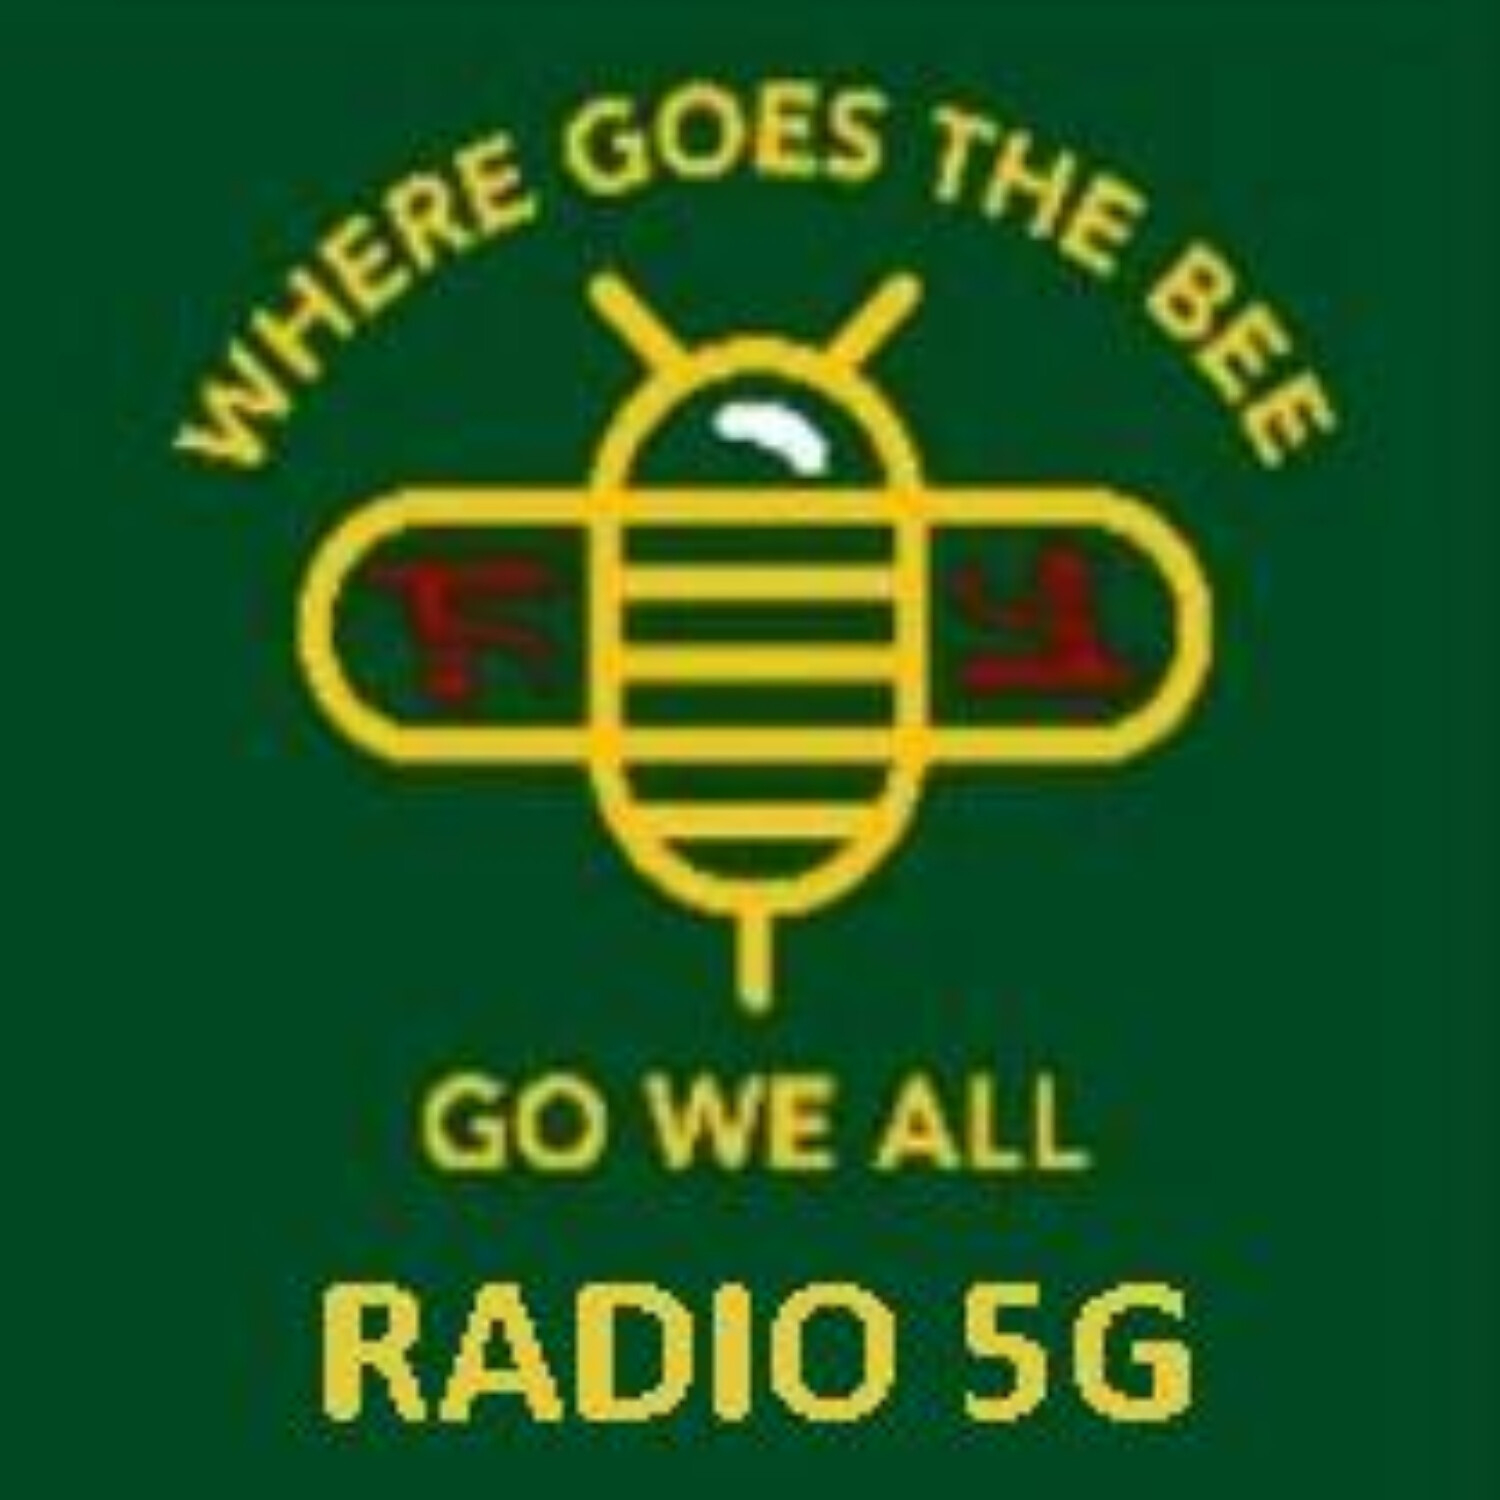 "RADIO 5G Other Voices"  12/7/22 - mRNA Brain Changes & Return of the Republic